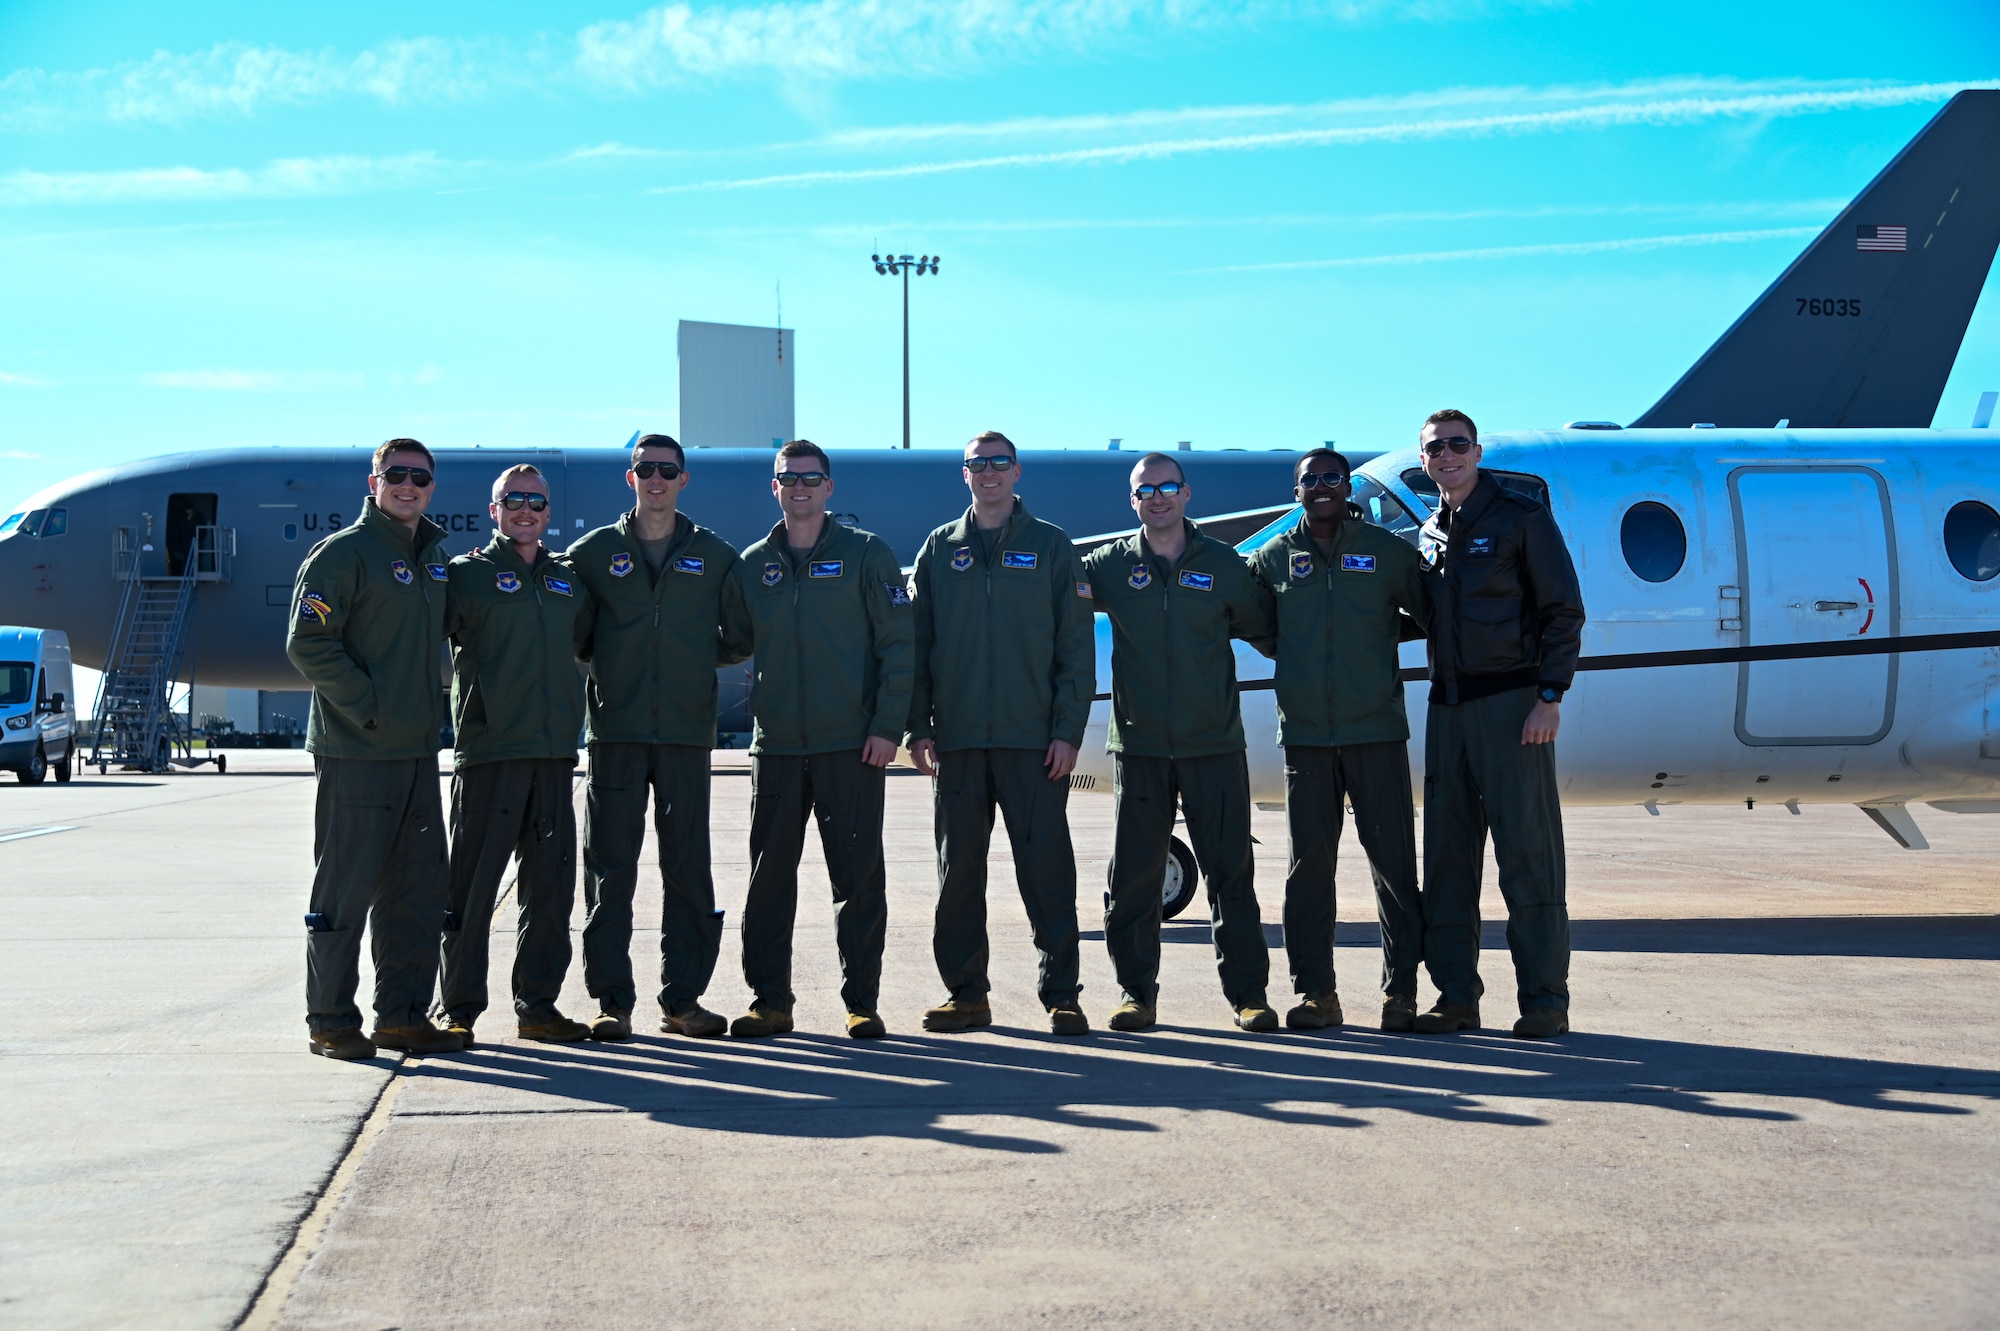 First assignment instructor pilots (FAIP) from Columbus Air Force Base (AFB), Mississippi, pose for a group photo at Altus AFB, Oklahoma, Nov. 15, 2022. FAIPs are selected to remain at their undergraduate pilot training base to instruct incoming students. (U.S. Air Force photo by Senior Airman Kayla Christenson)